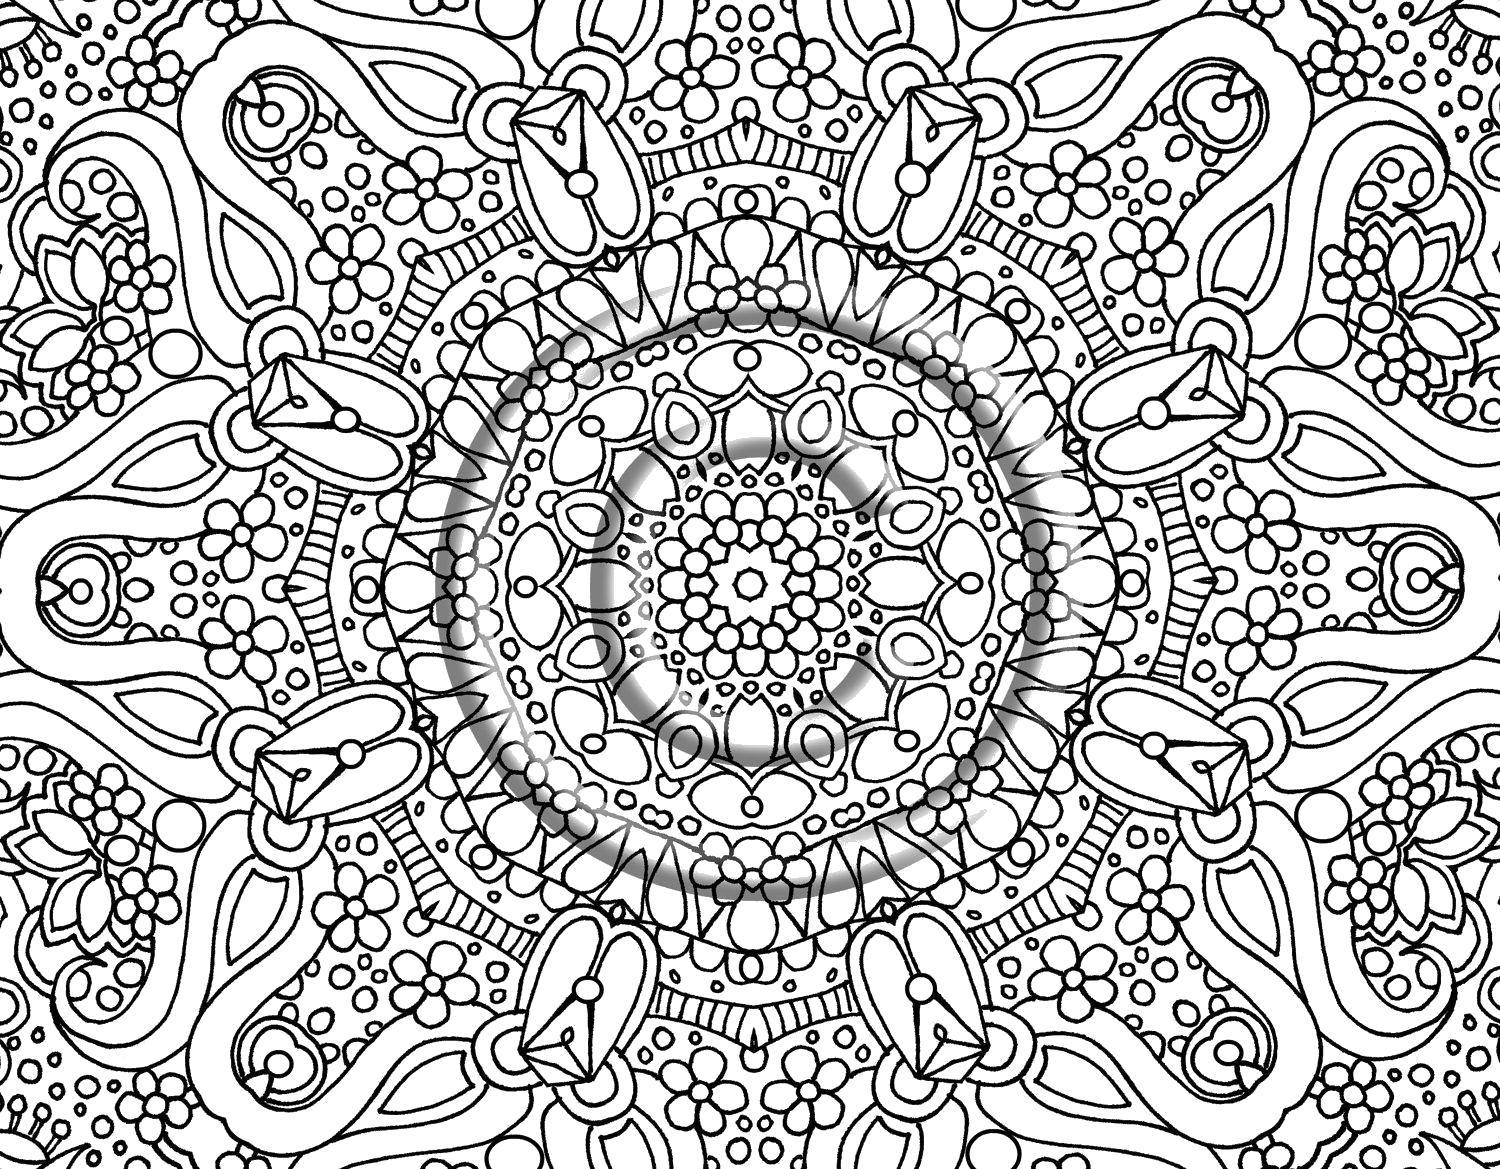 Coloring A complex pattern. Category coloring pages for teenagers. Tags:  Patterns, geometric.